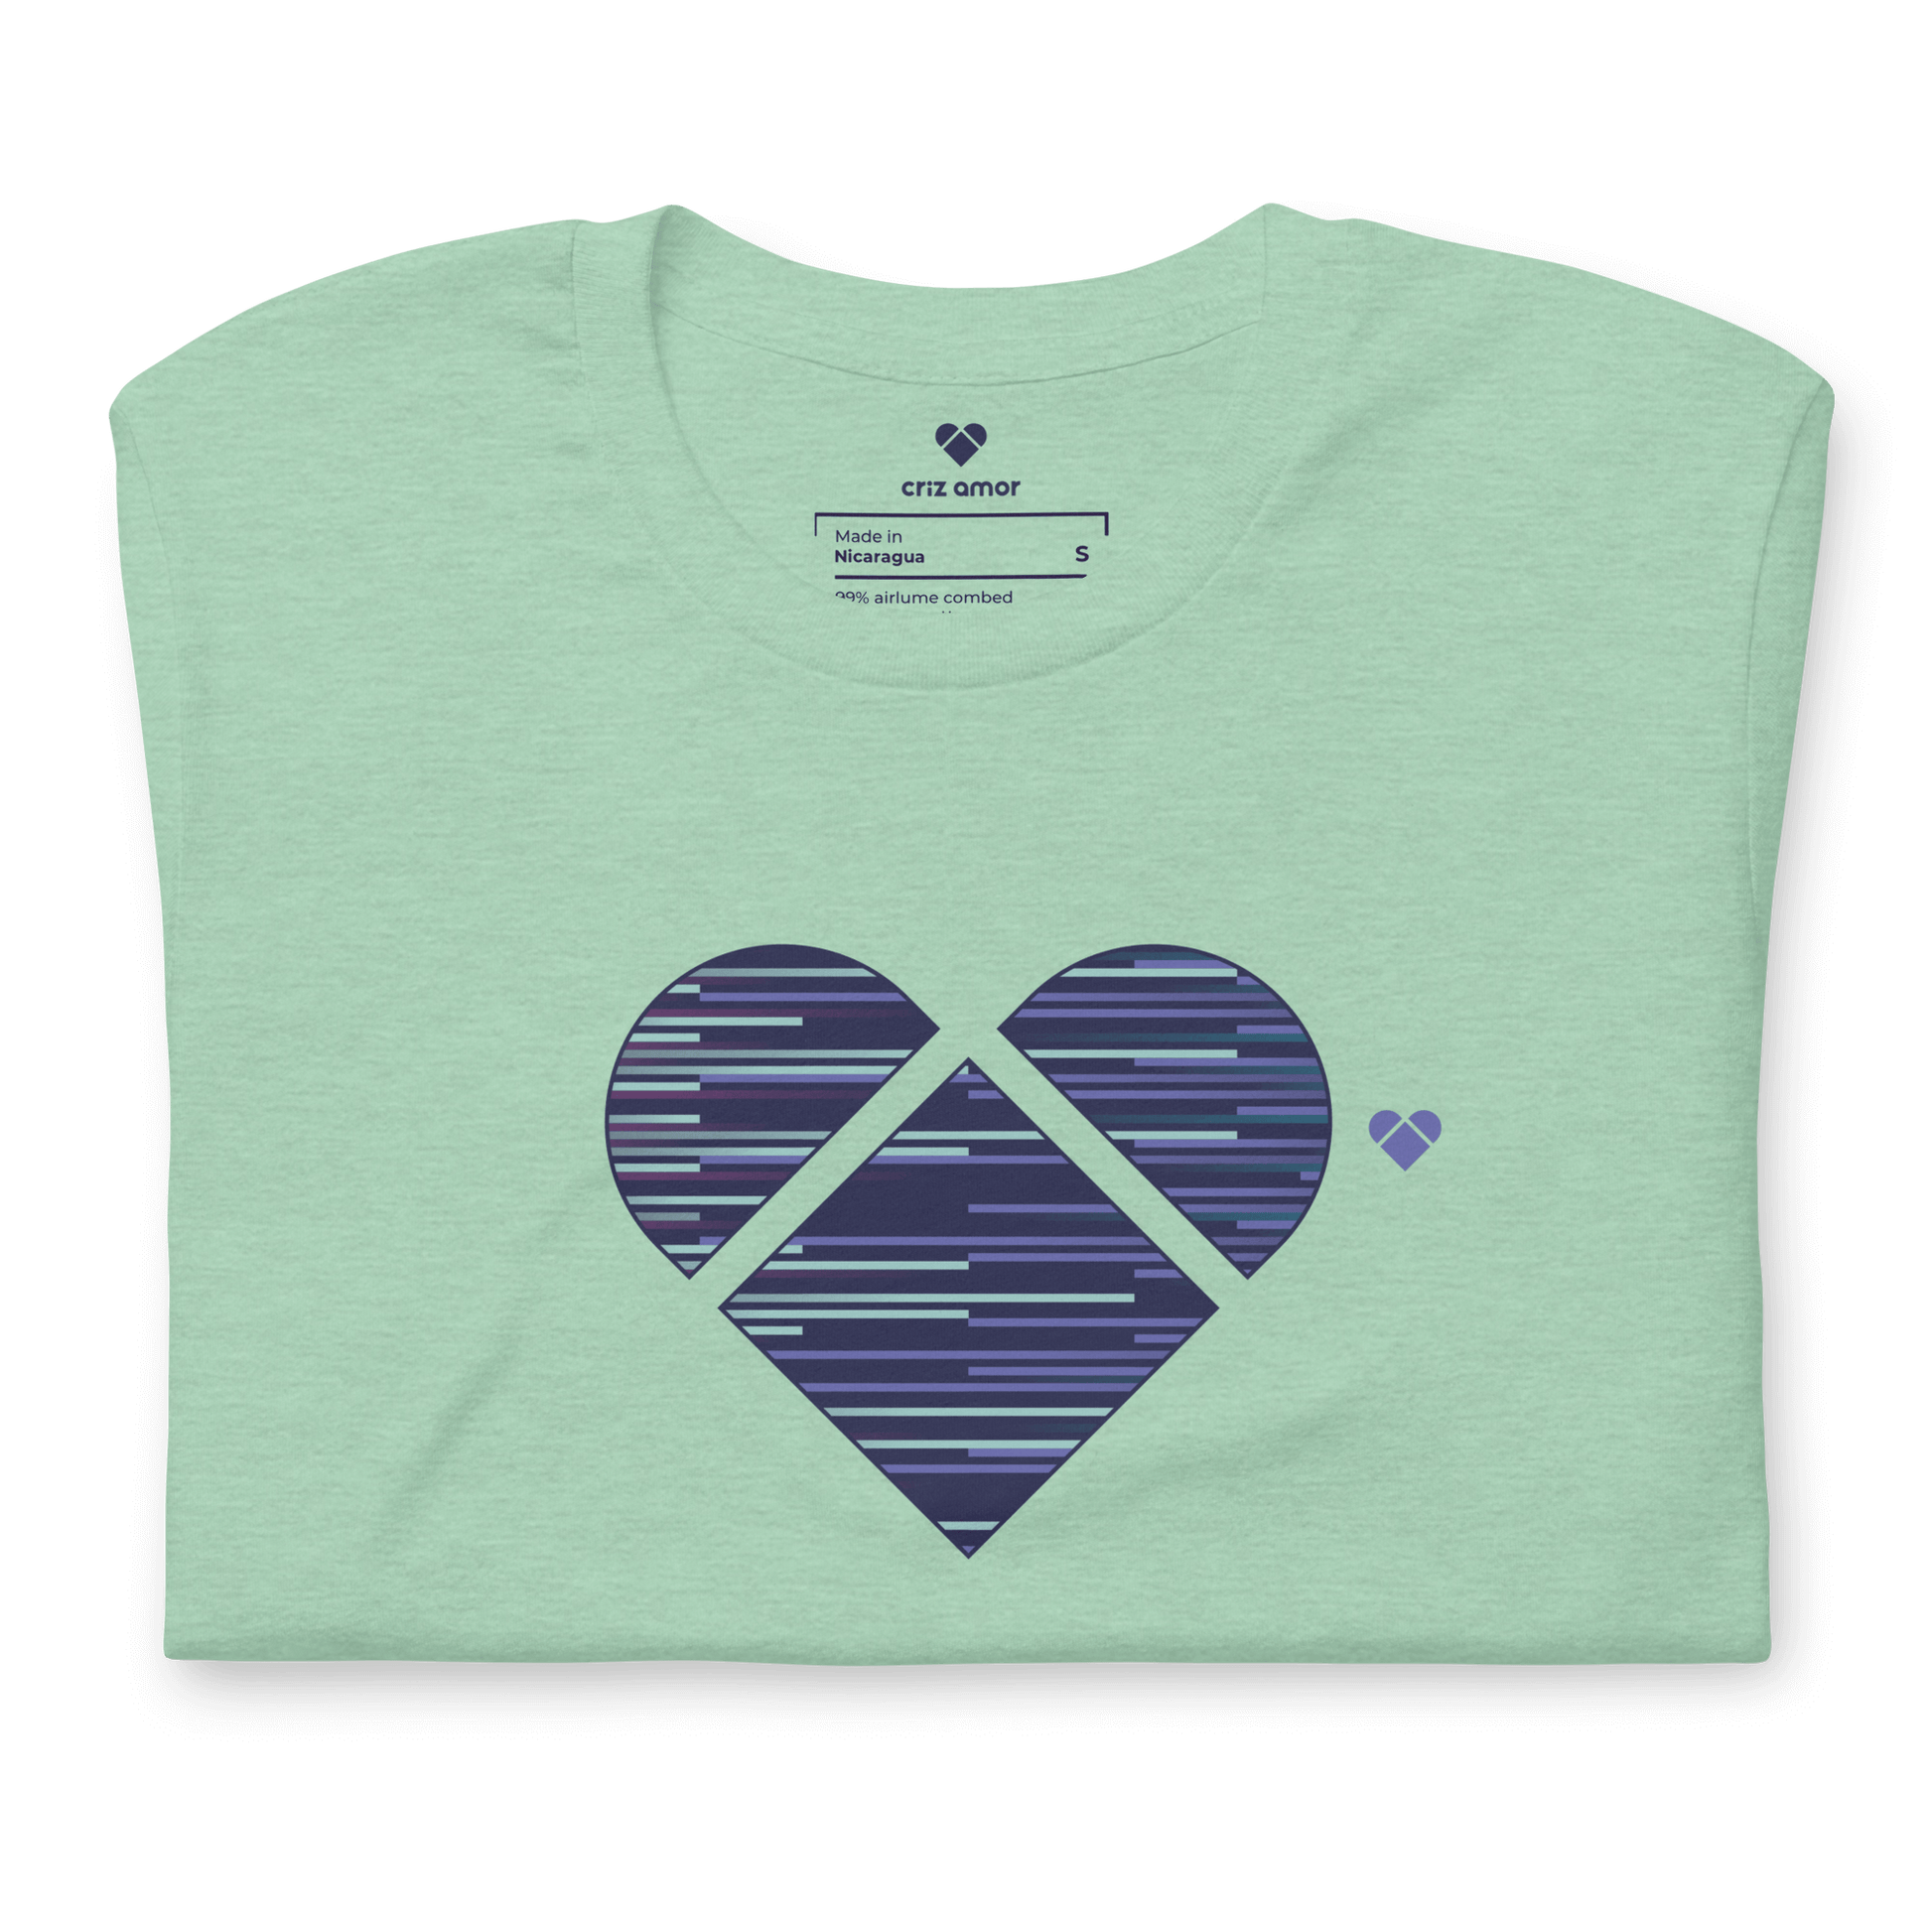 Close-up of heart logo filled with periwinkle and mint stripes